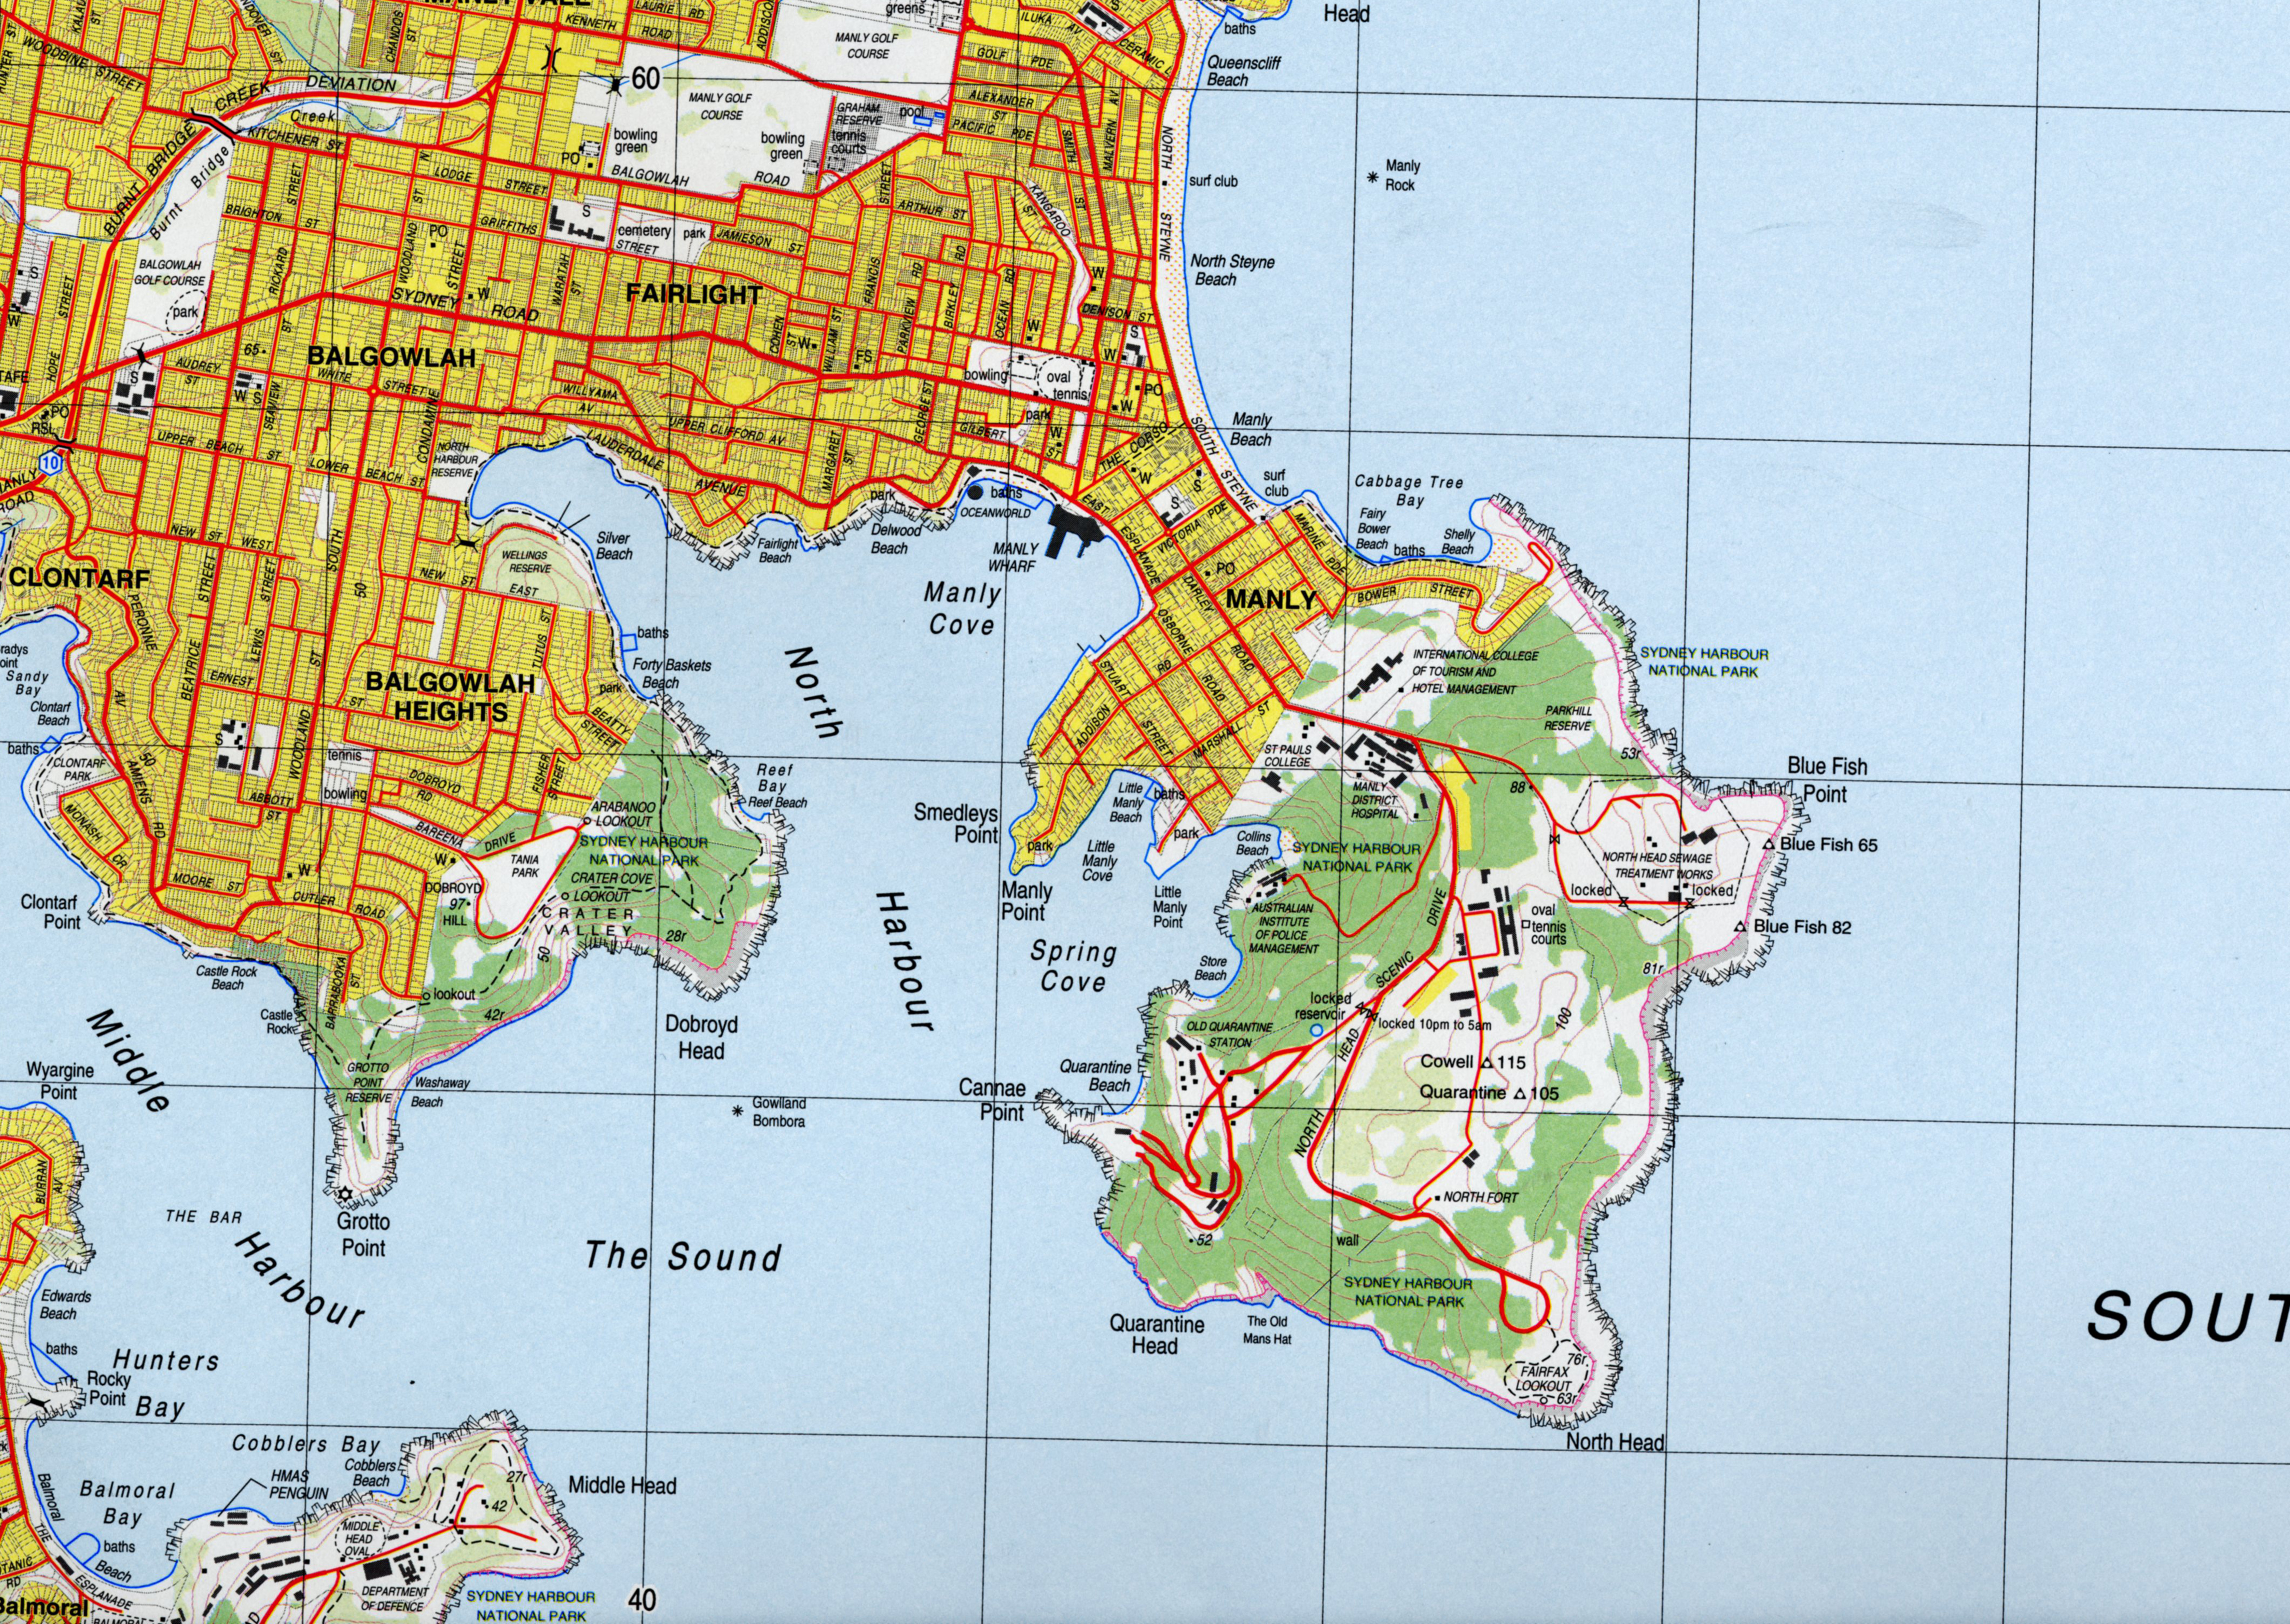 Topographic Maps | Intergovernmental Committee on Surveying and Mapping